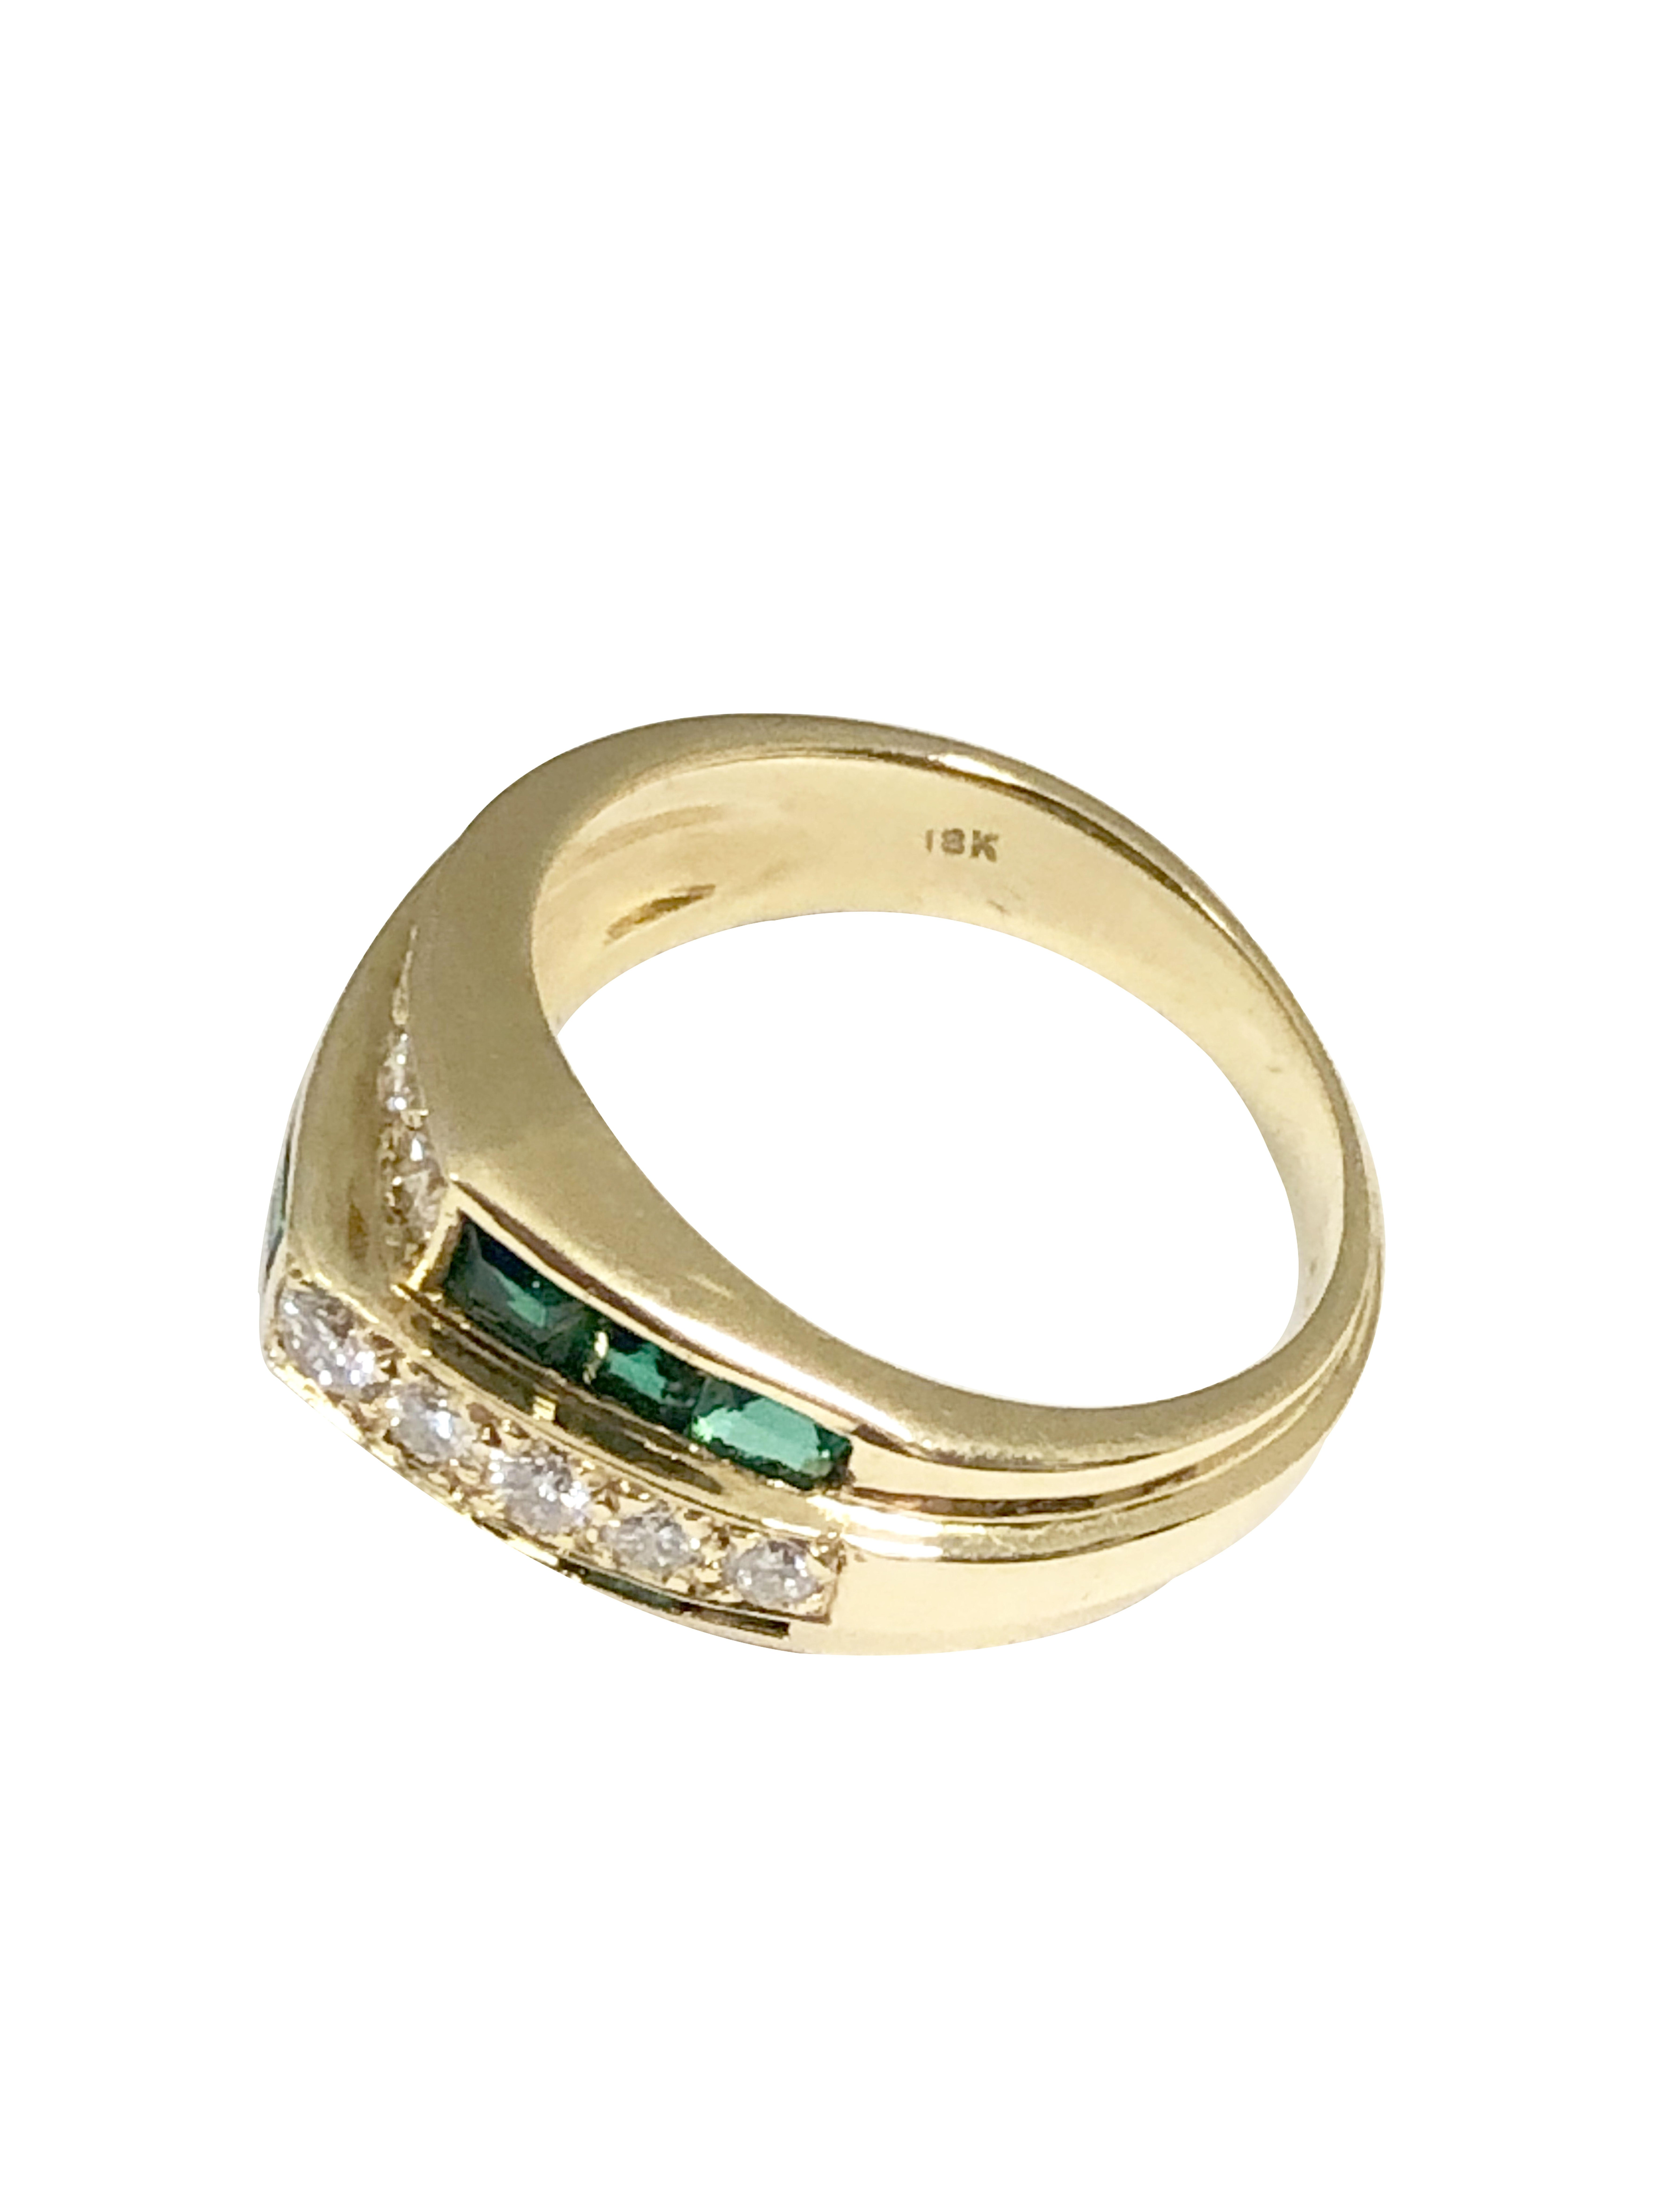 Oscar Heyman Yellow Gold Diamond and Emerald Ring In Excellent Condition For Sale In Chicago, IL